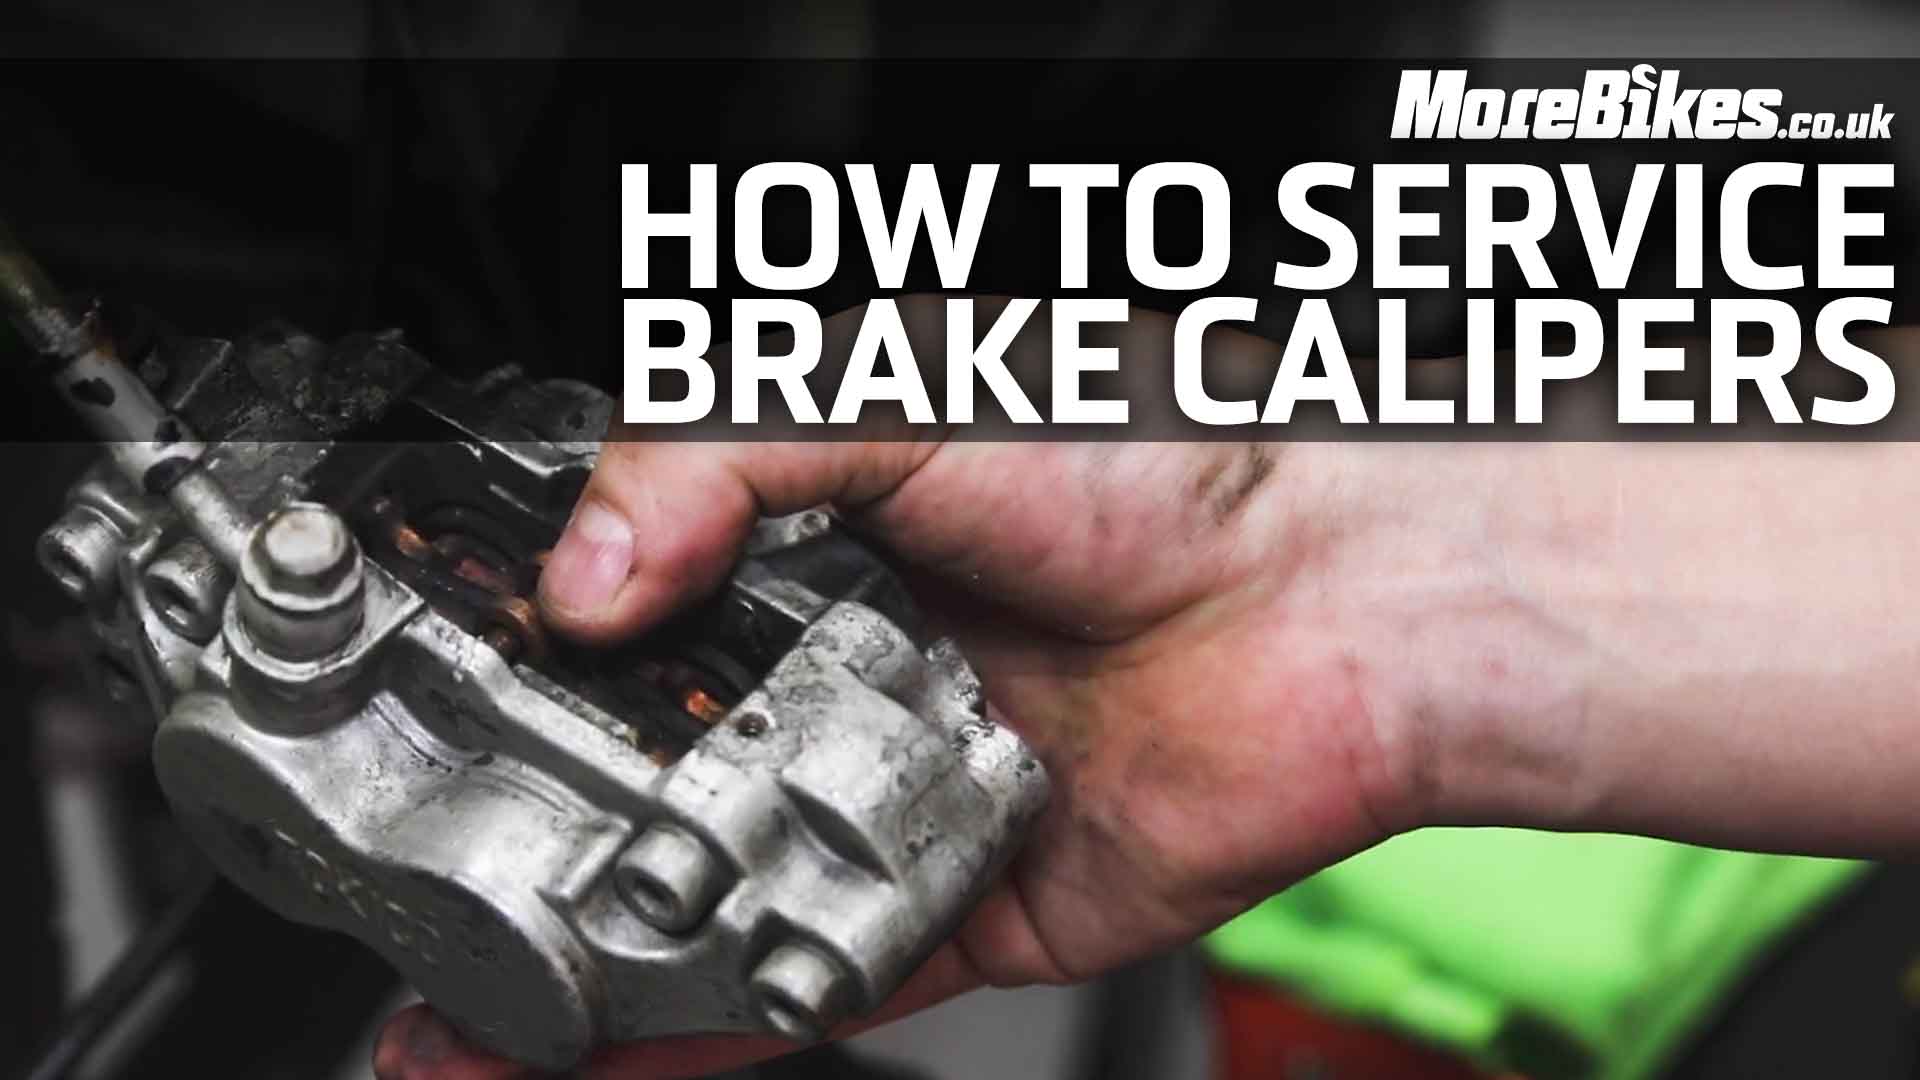 FETTLING FRIDAY: How to SERVICE your bike’s brakes. Episode ONE of our motorcycle maintenance VIDEO series.